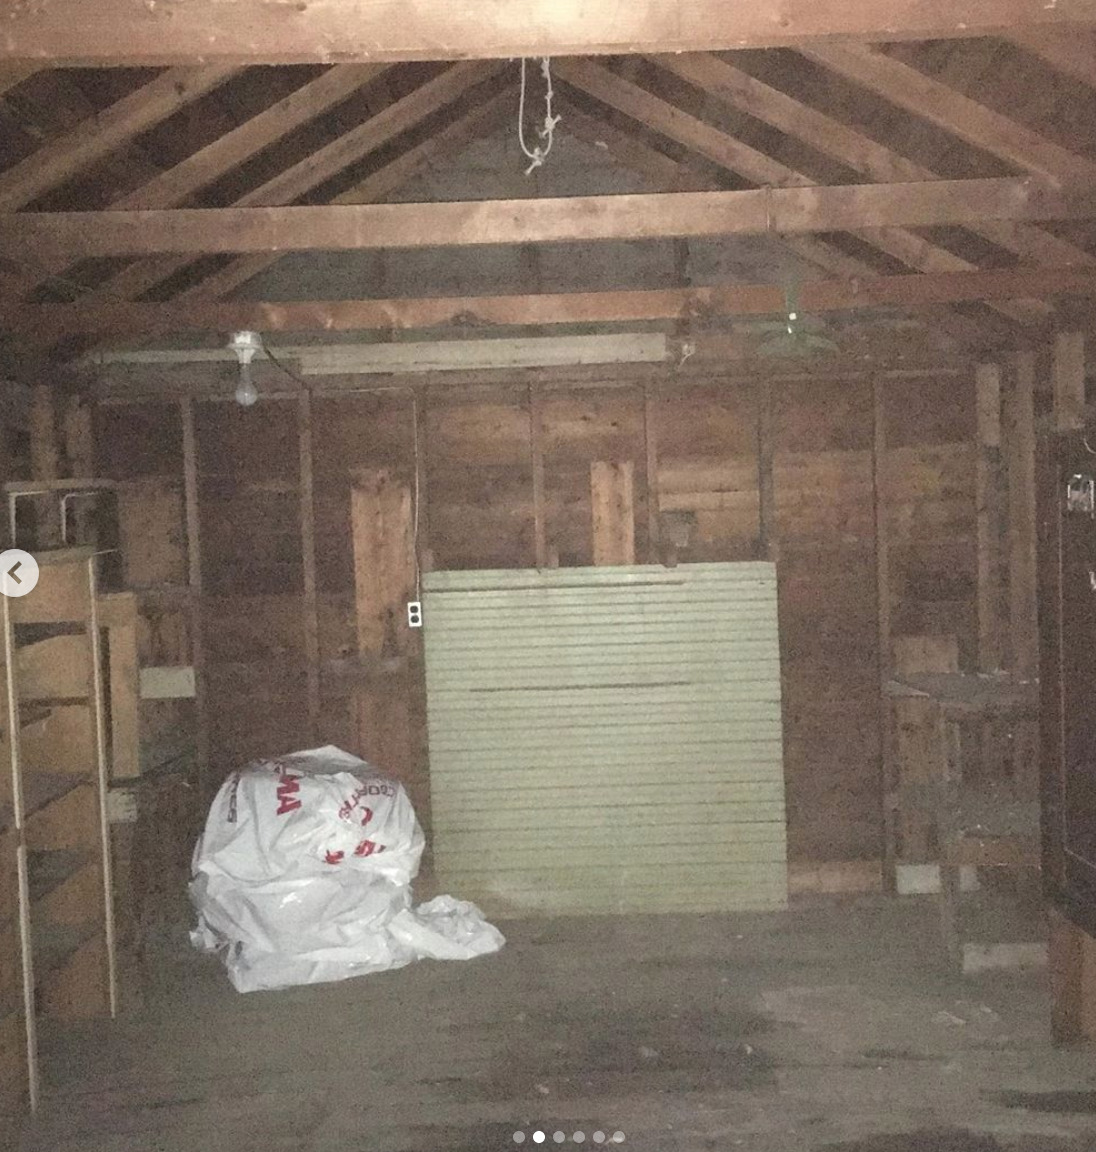 BEFORE: INTERIOR OF SHED